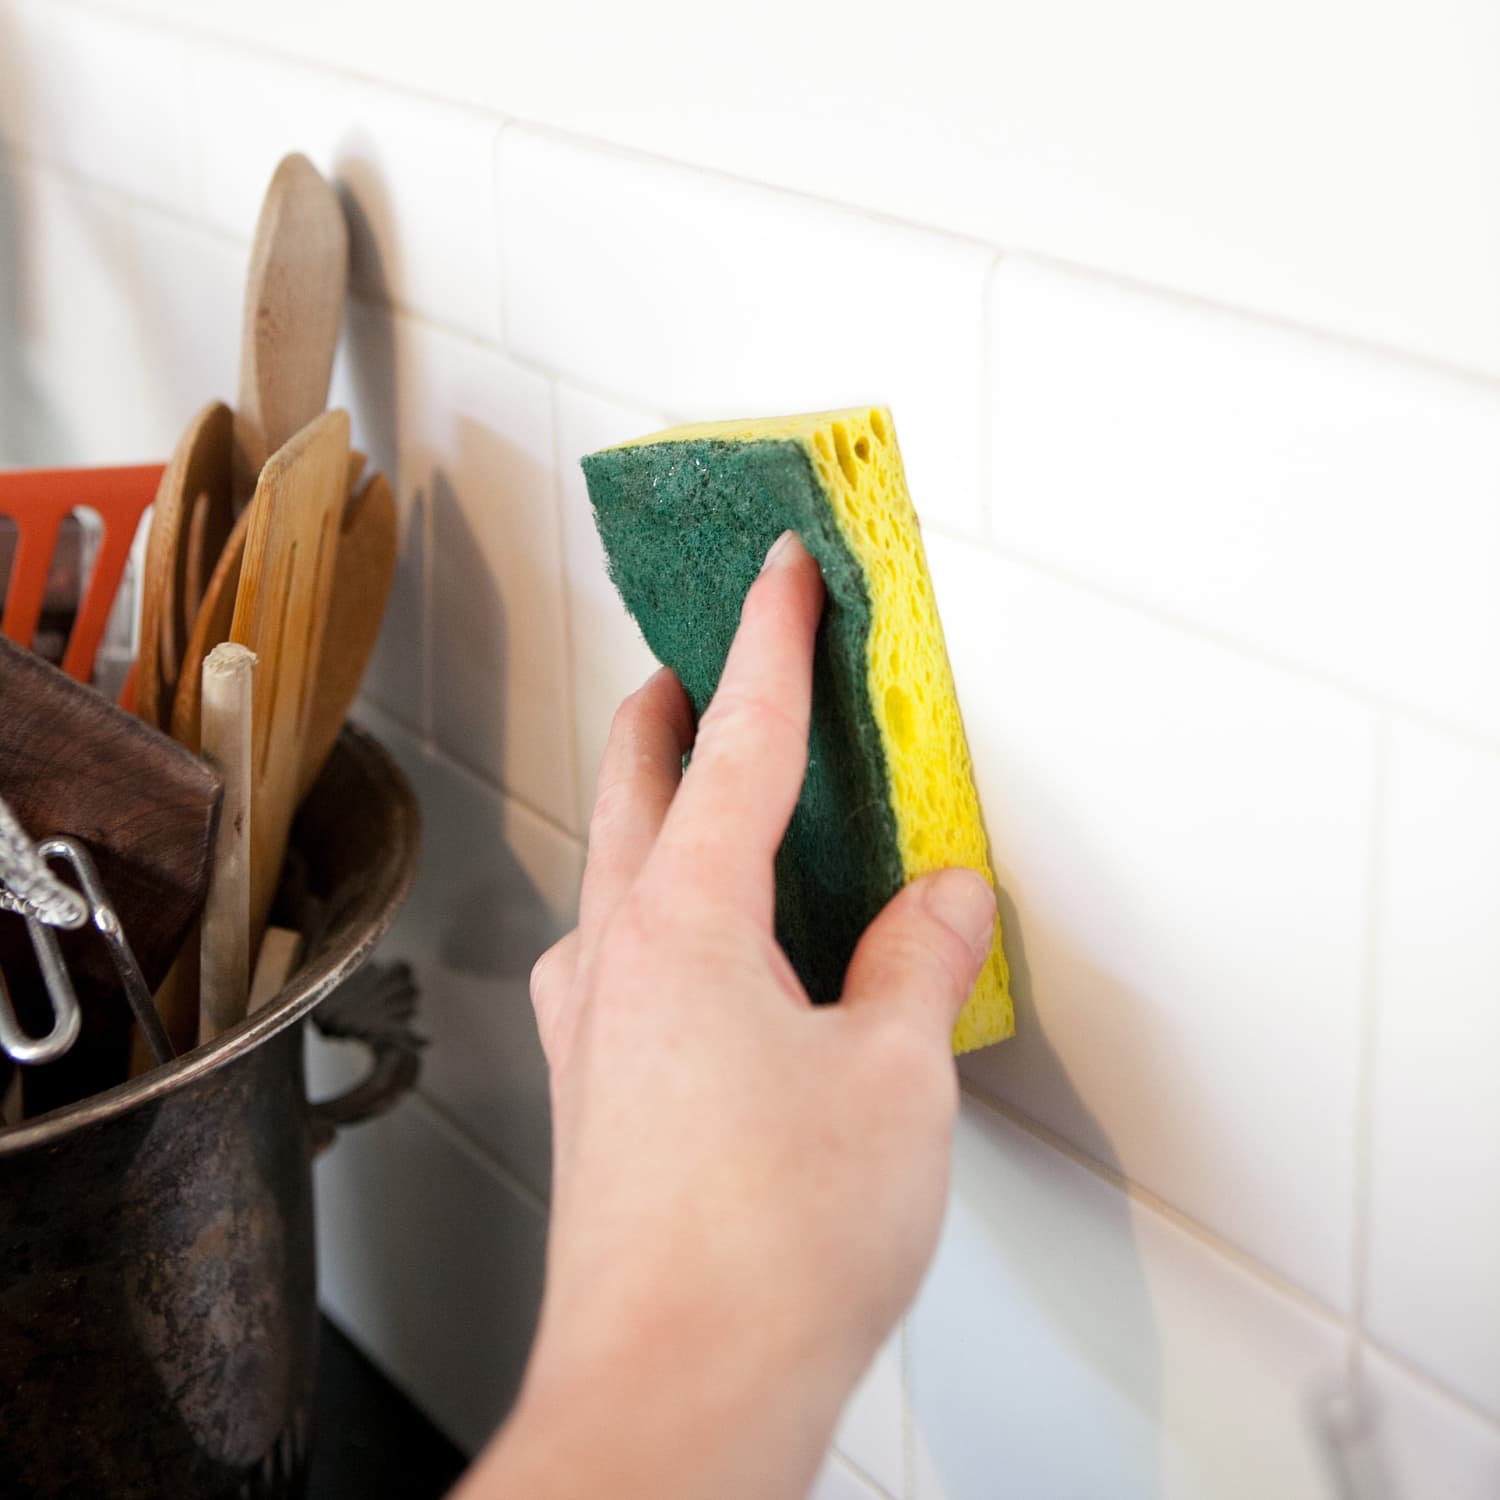 How To Clean Greasy Walls, Backsplashes, and Cabinets  Kitchn